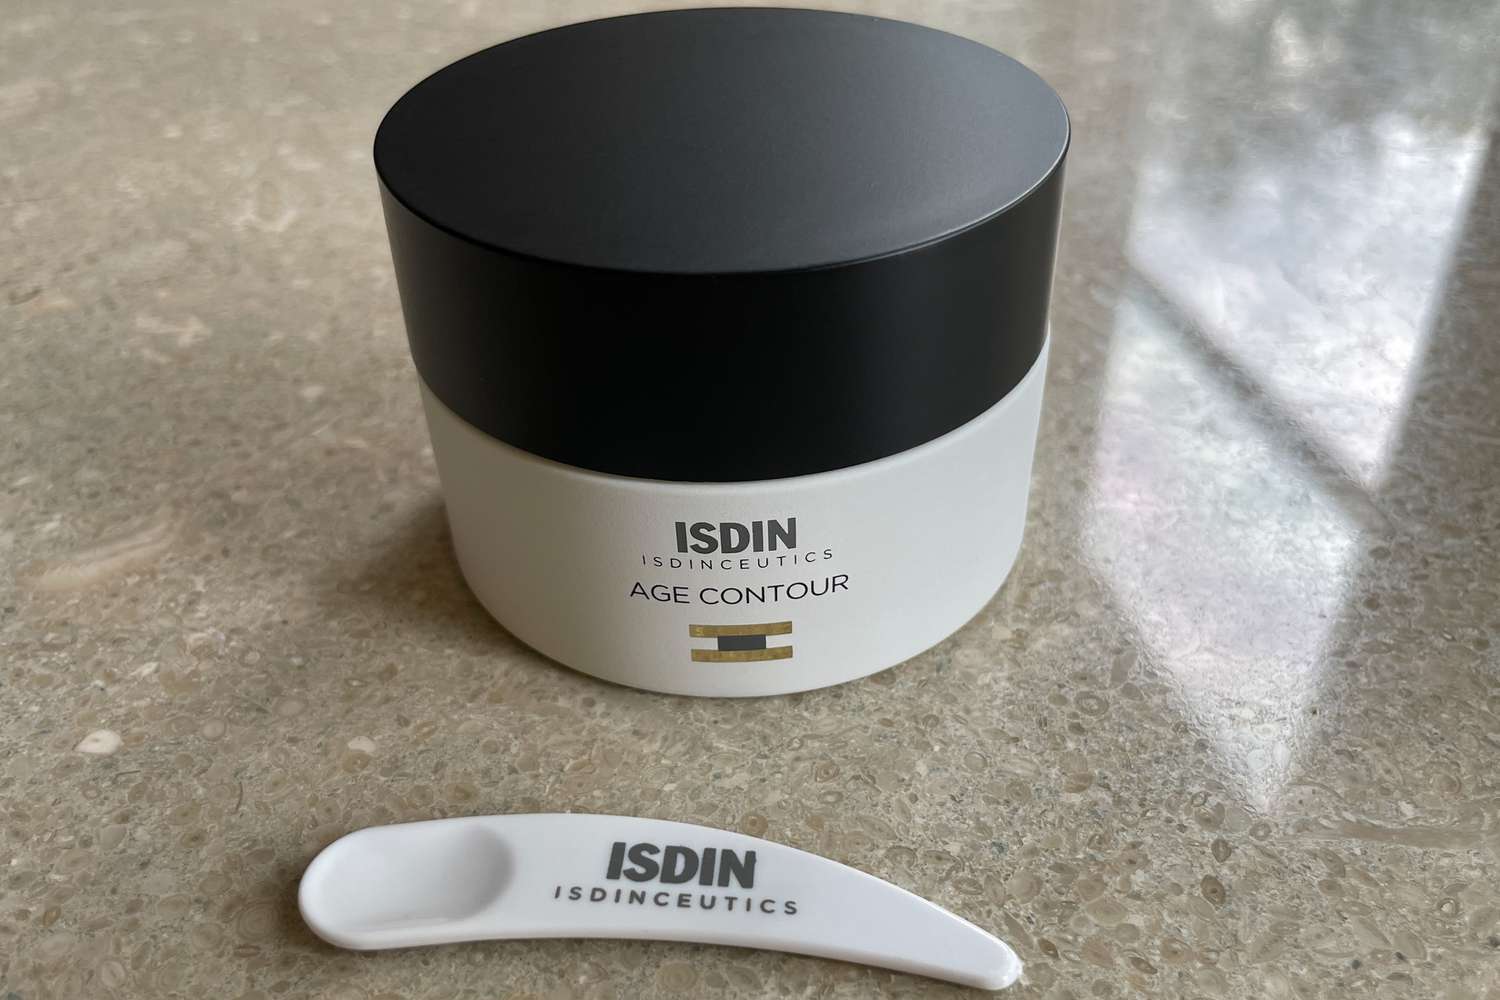 A jar of ISDIN ISDINCEUTICS Age Contour Firming and Rejuvenating Cream behind an applicator spoon